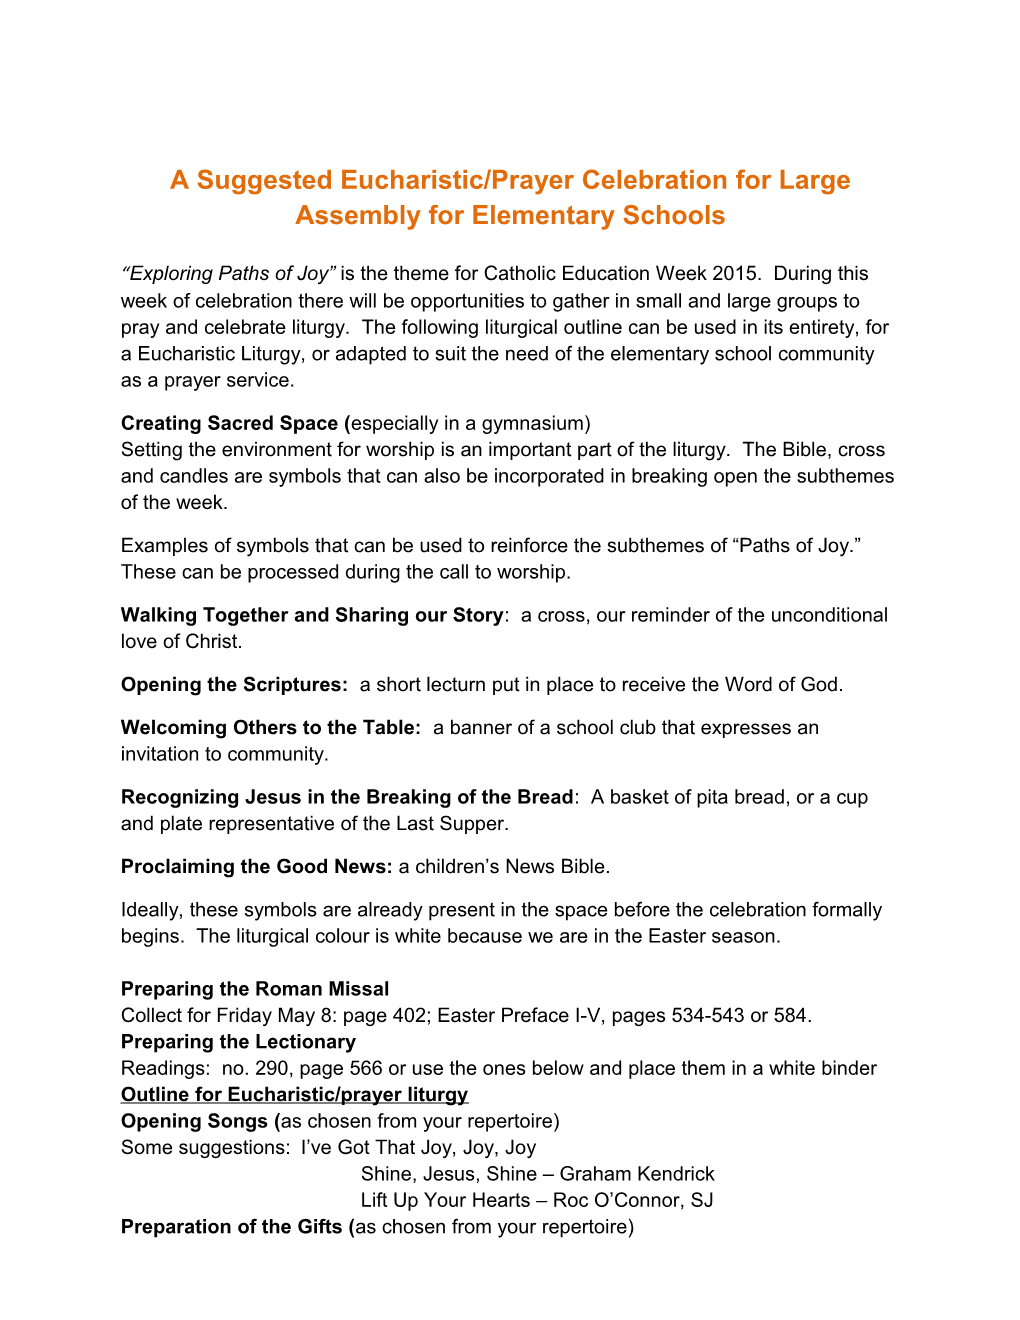 A Suggested Eucharistic/Prayer Celebration for Large Assembly for Elementary Schools